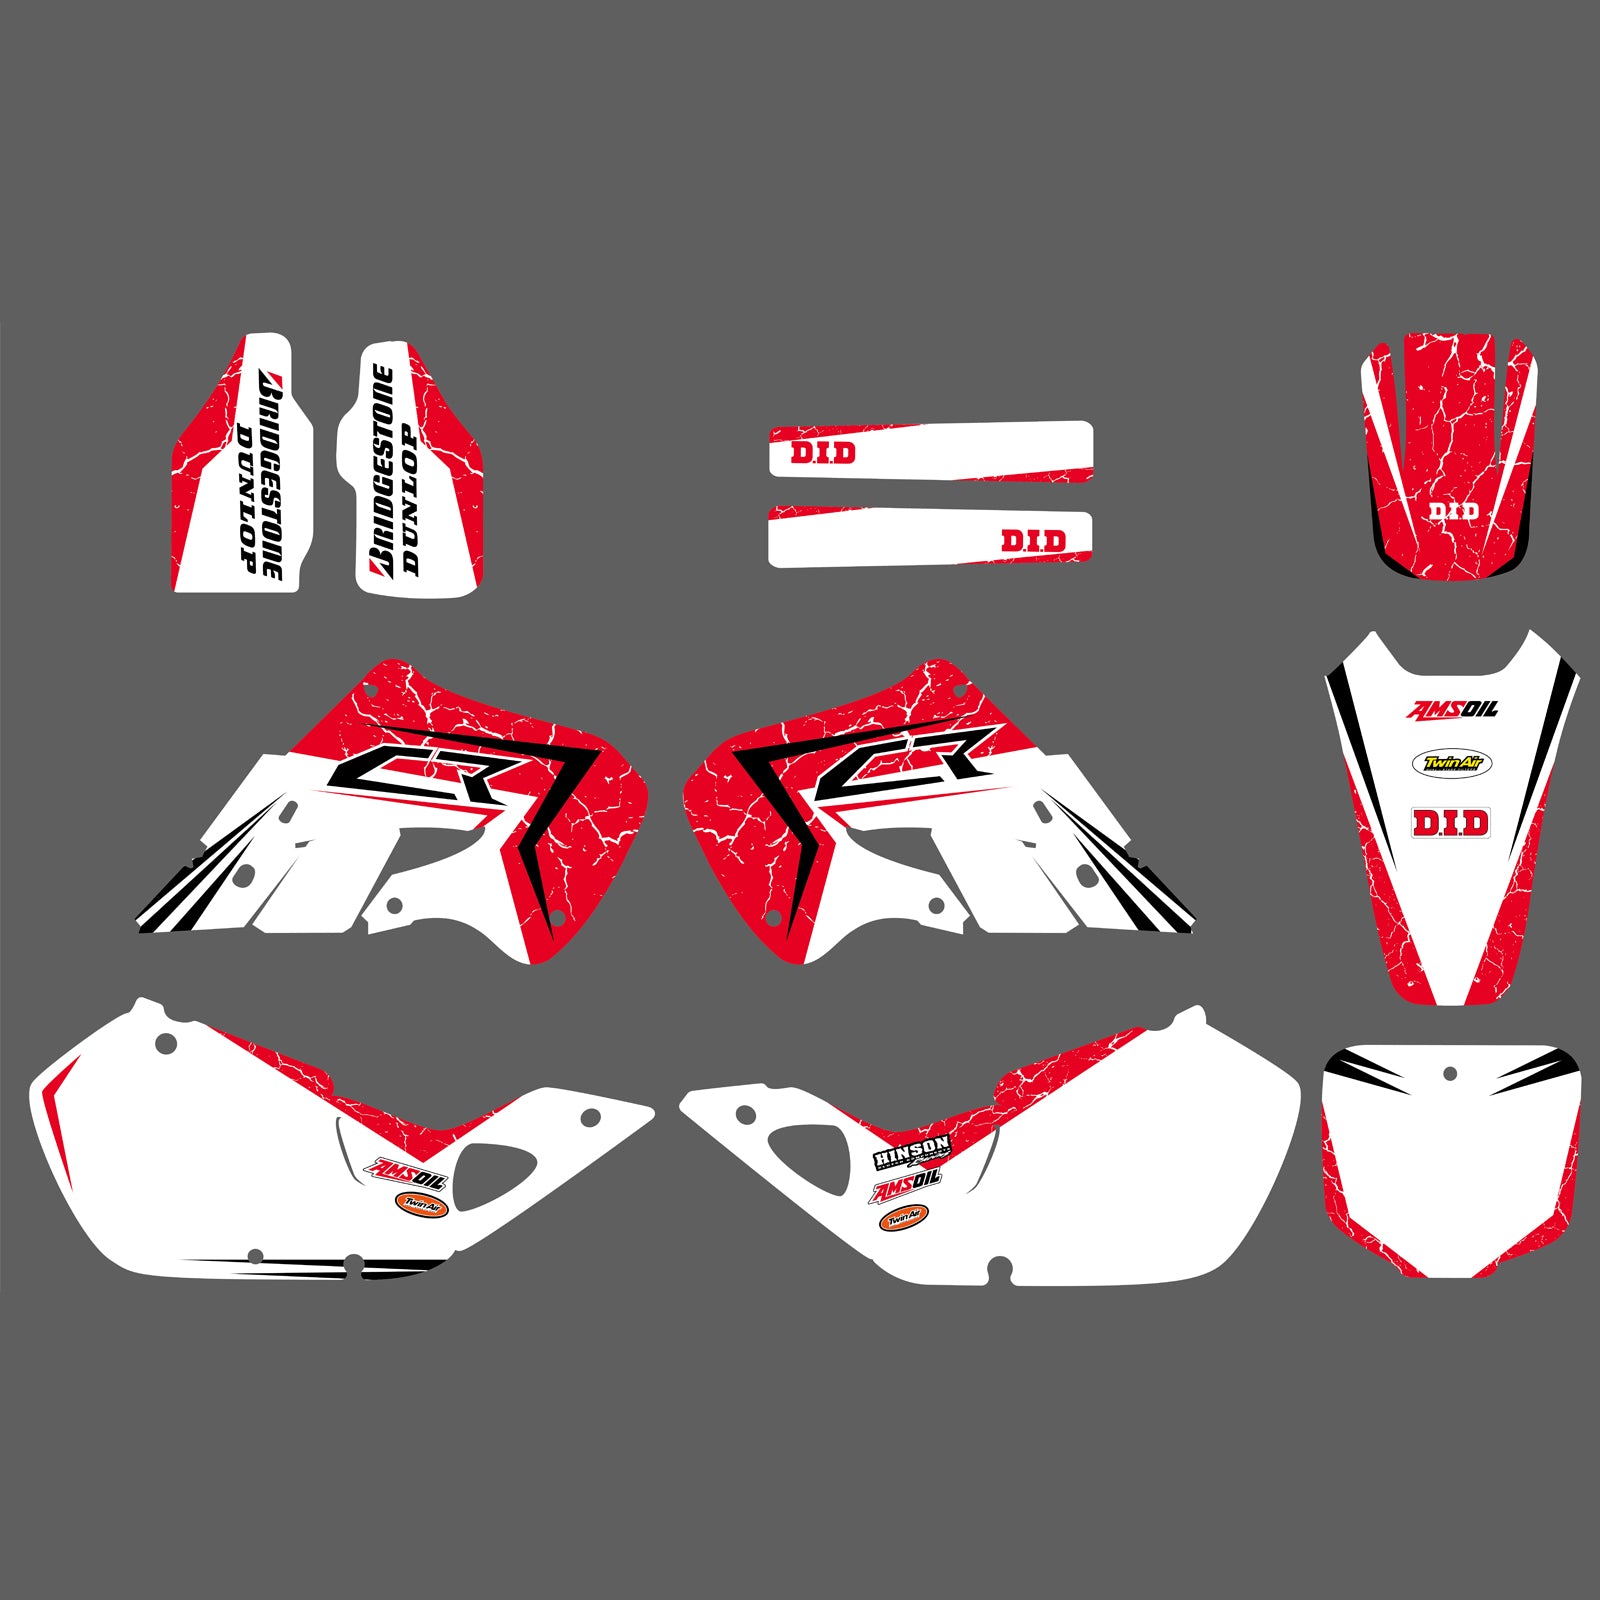 Full  Decals Graphics Backgrounds Stickers For Honda CR125 1998-1999 CR250 1997-1999